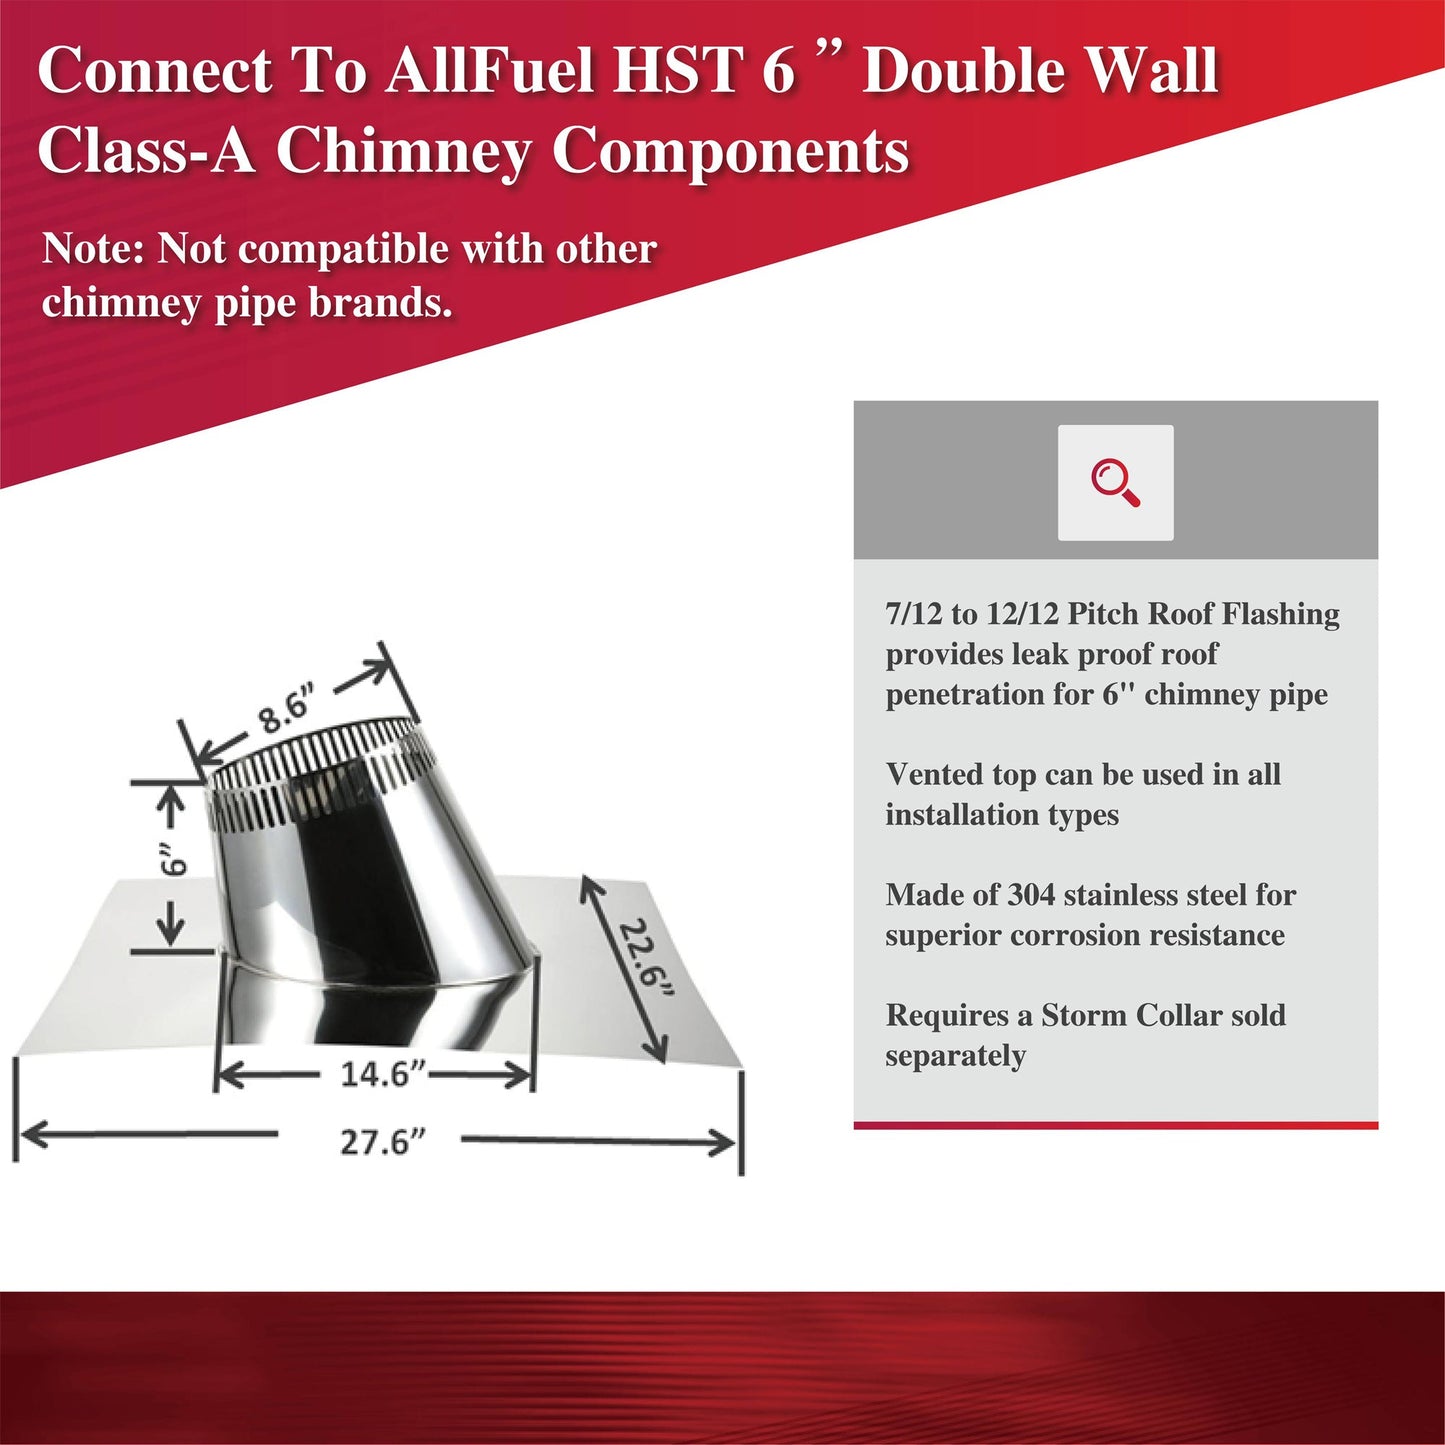 Pitch Roof Flashing 7/12 to 12/12 for 6" Inner Diameter Chimney Pipe